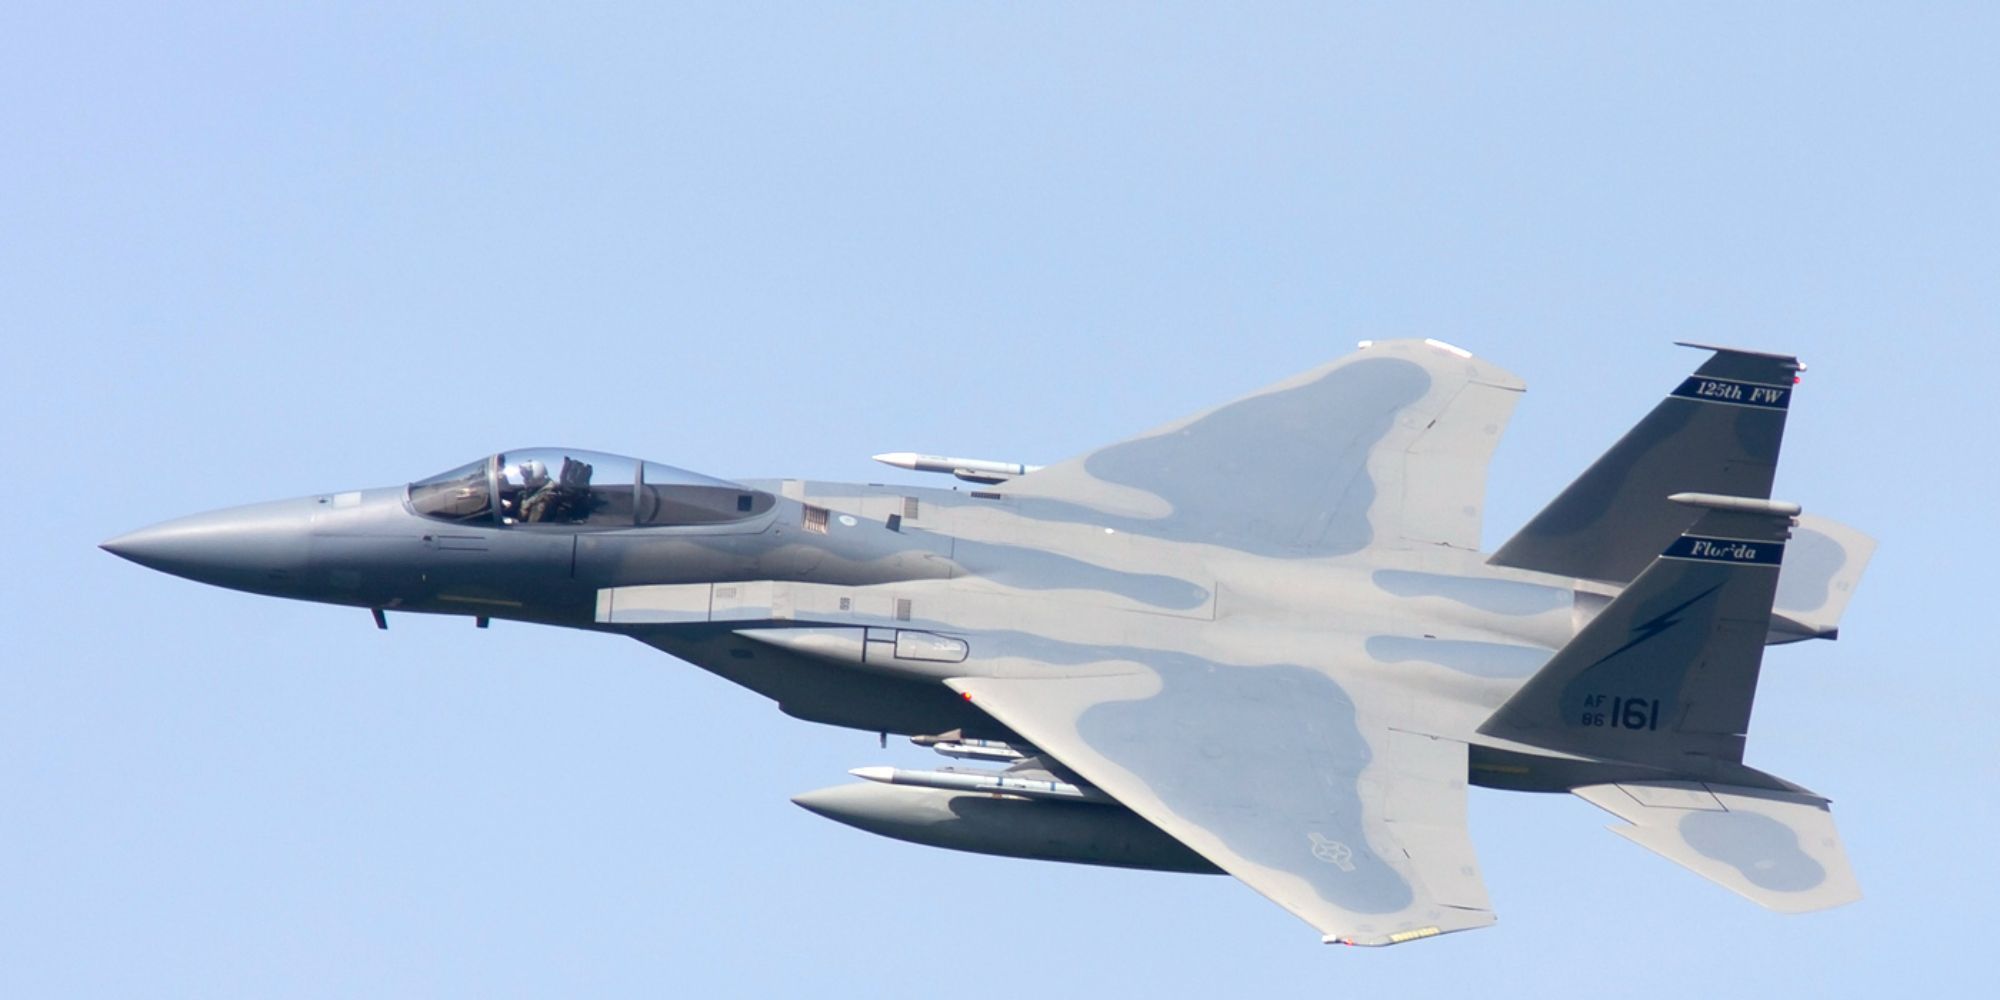 US Air Force F-15C Strike Jet Flies At An Airshow In Florida Sporting Grey Camoflauge 